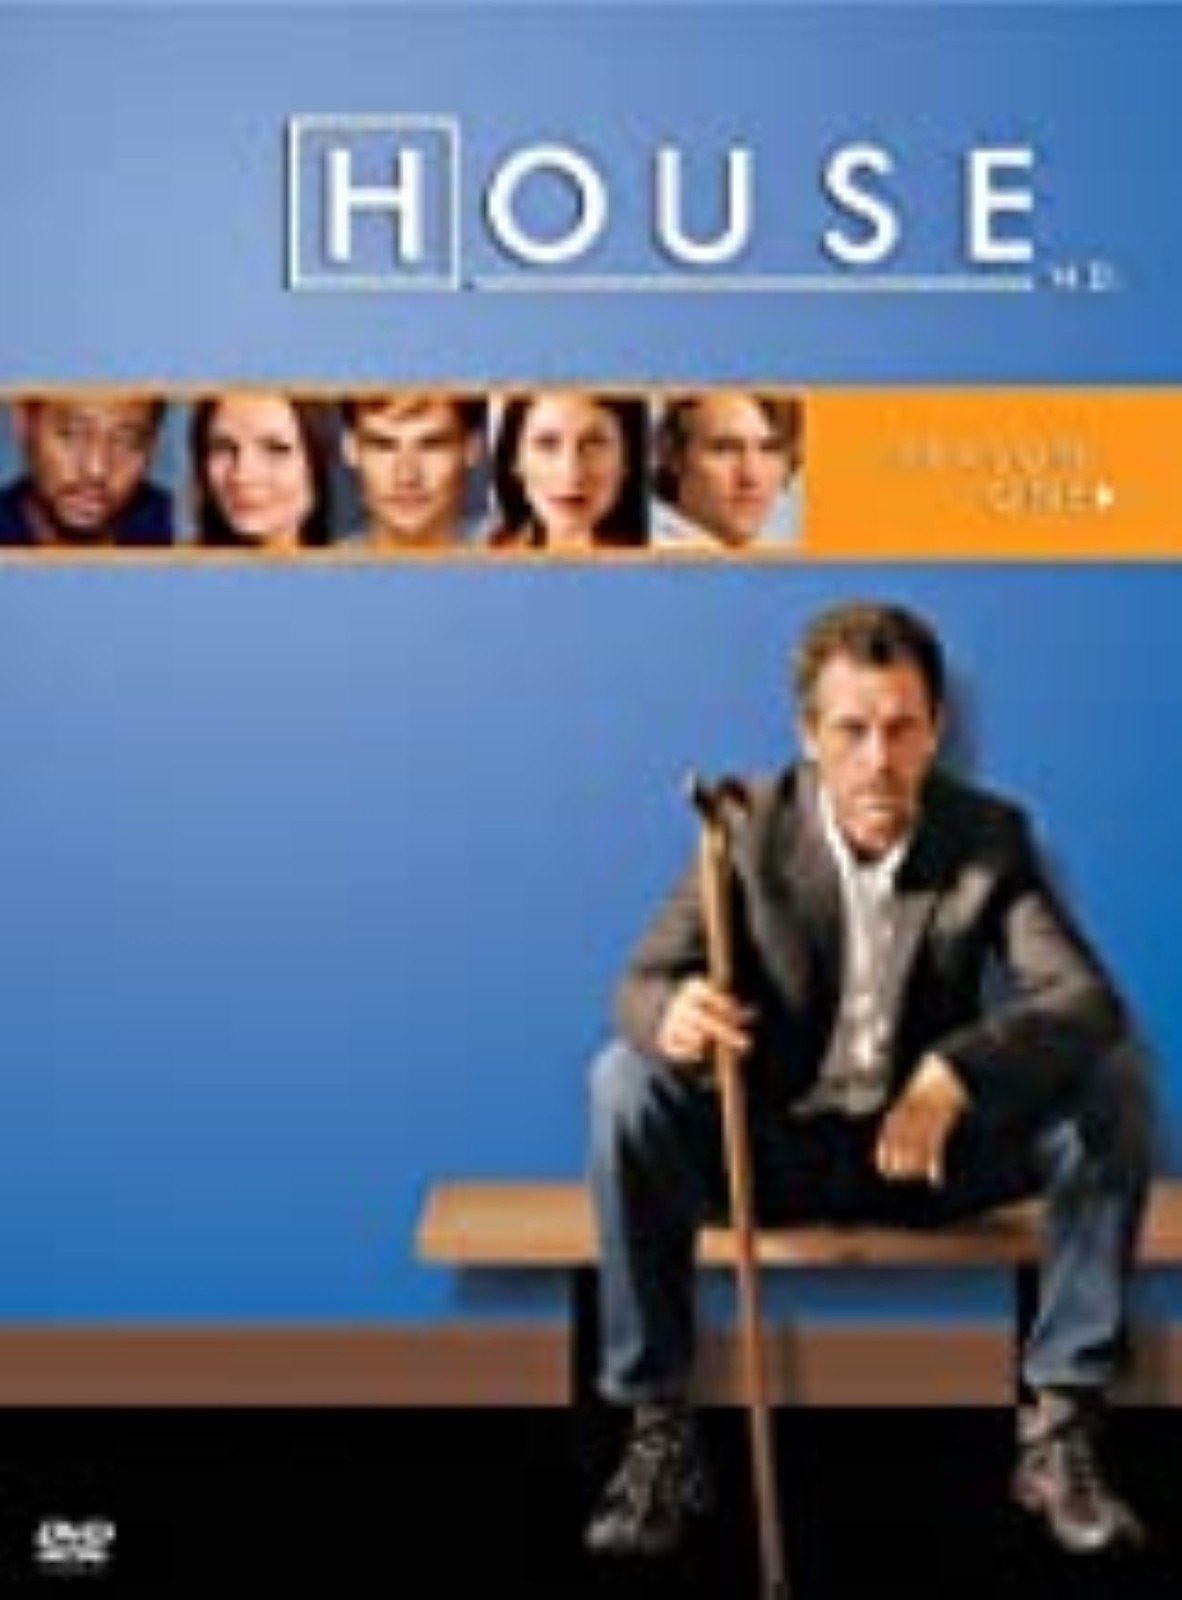 Primary image for House, M.D.: Season 1 Dvd